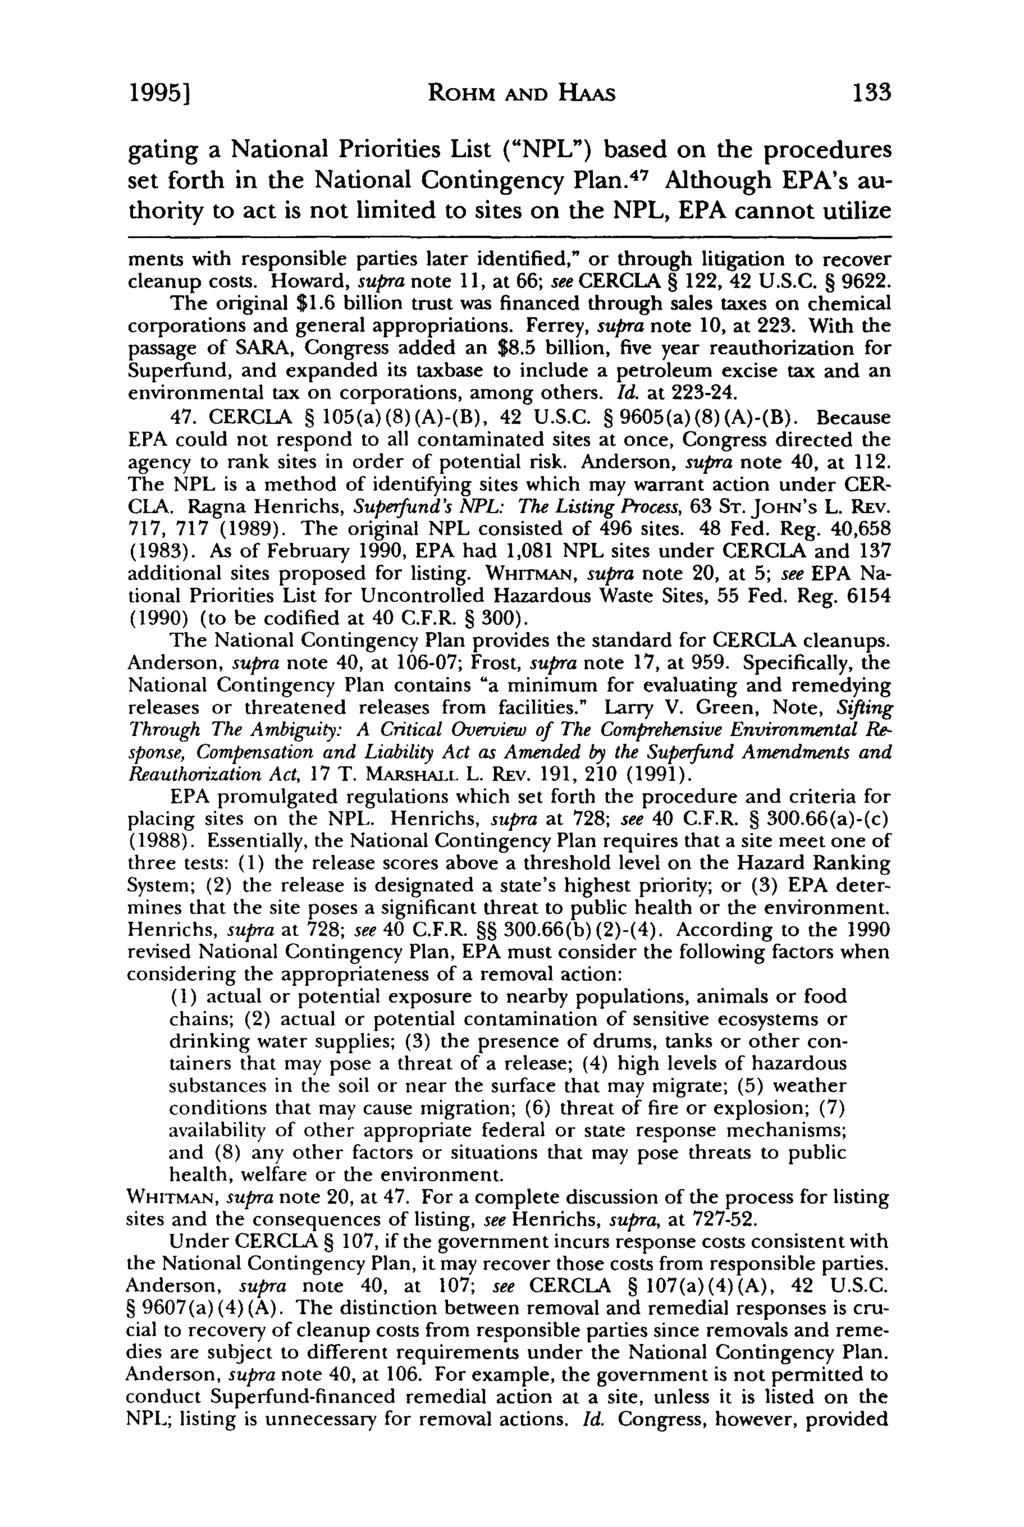 1995] Aberbach: Recoverability of Government Oversight Costs under CERCLA Section ROHM AND HAAS gating a National Priorities List ("NPL") based on the procedures set forth in the National Contingency